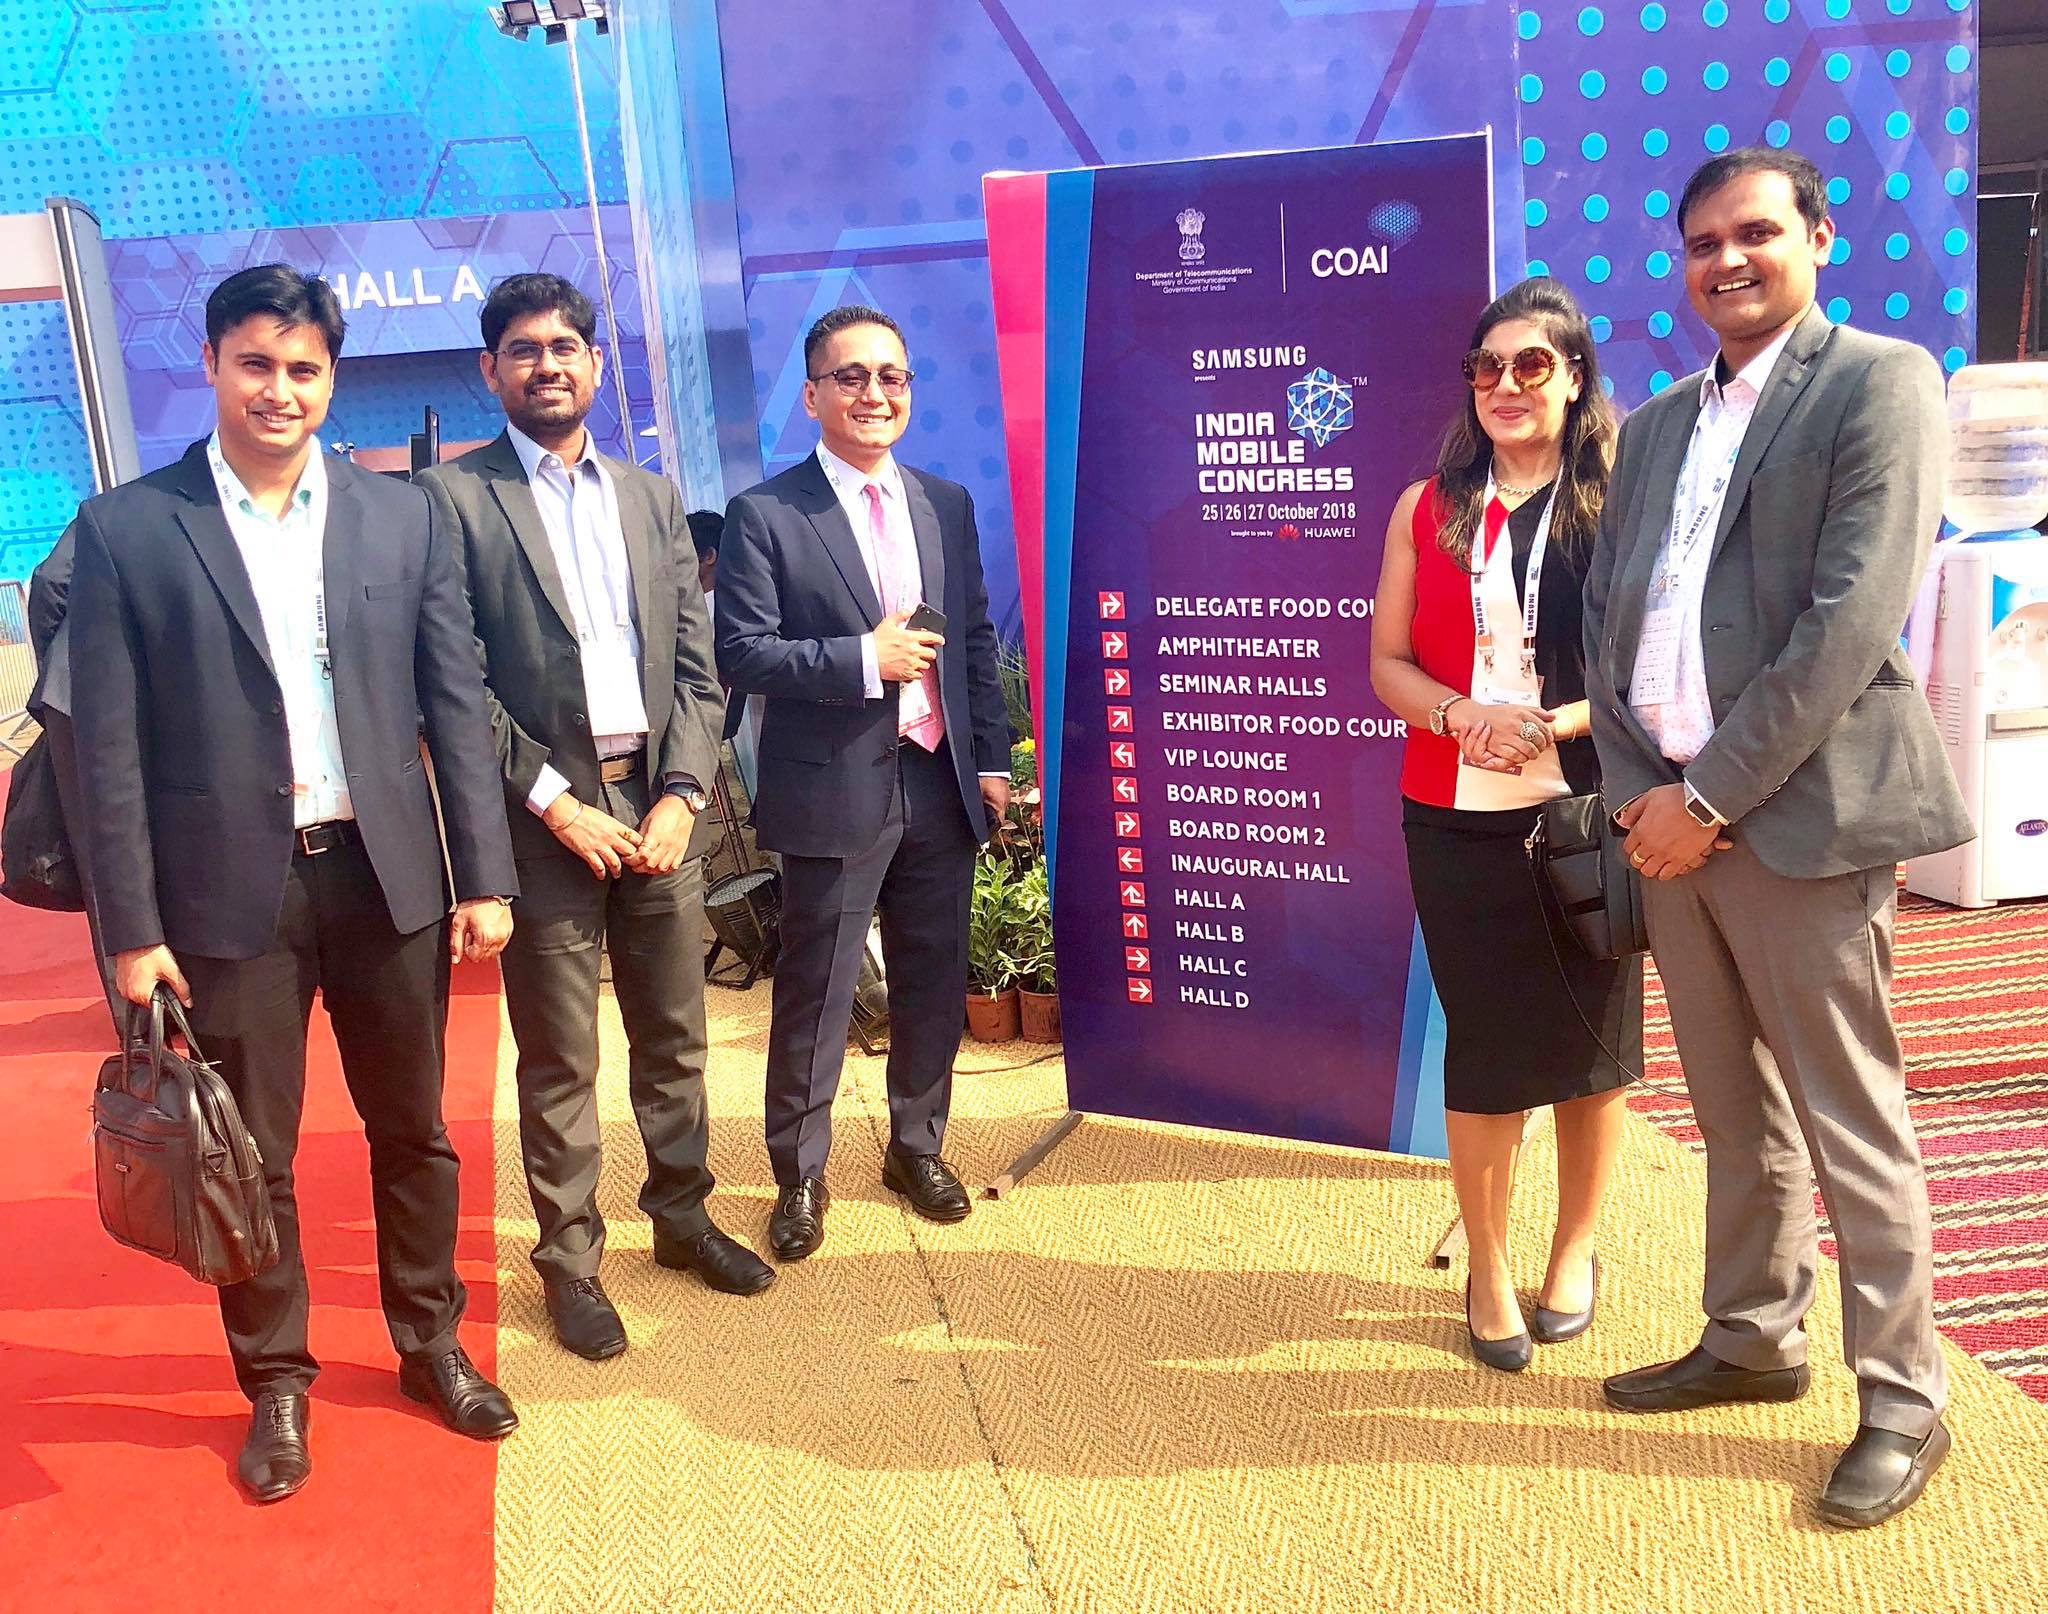 Seen here is Deepak Rai (Co-founder &amp; CEO, PulsePlay Digital) with Rahul Kumar Verma (Right-First) and SBUP Alumni friends at #IMC2018